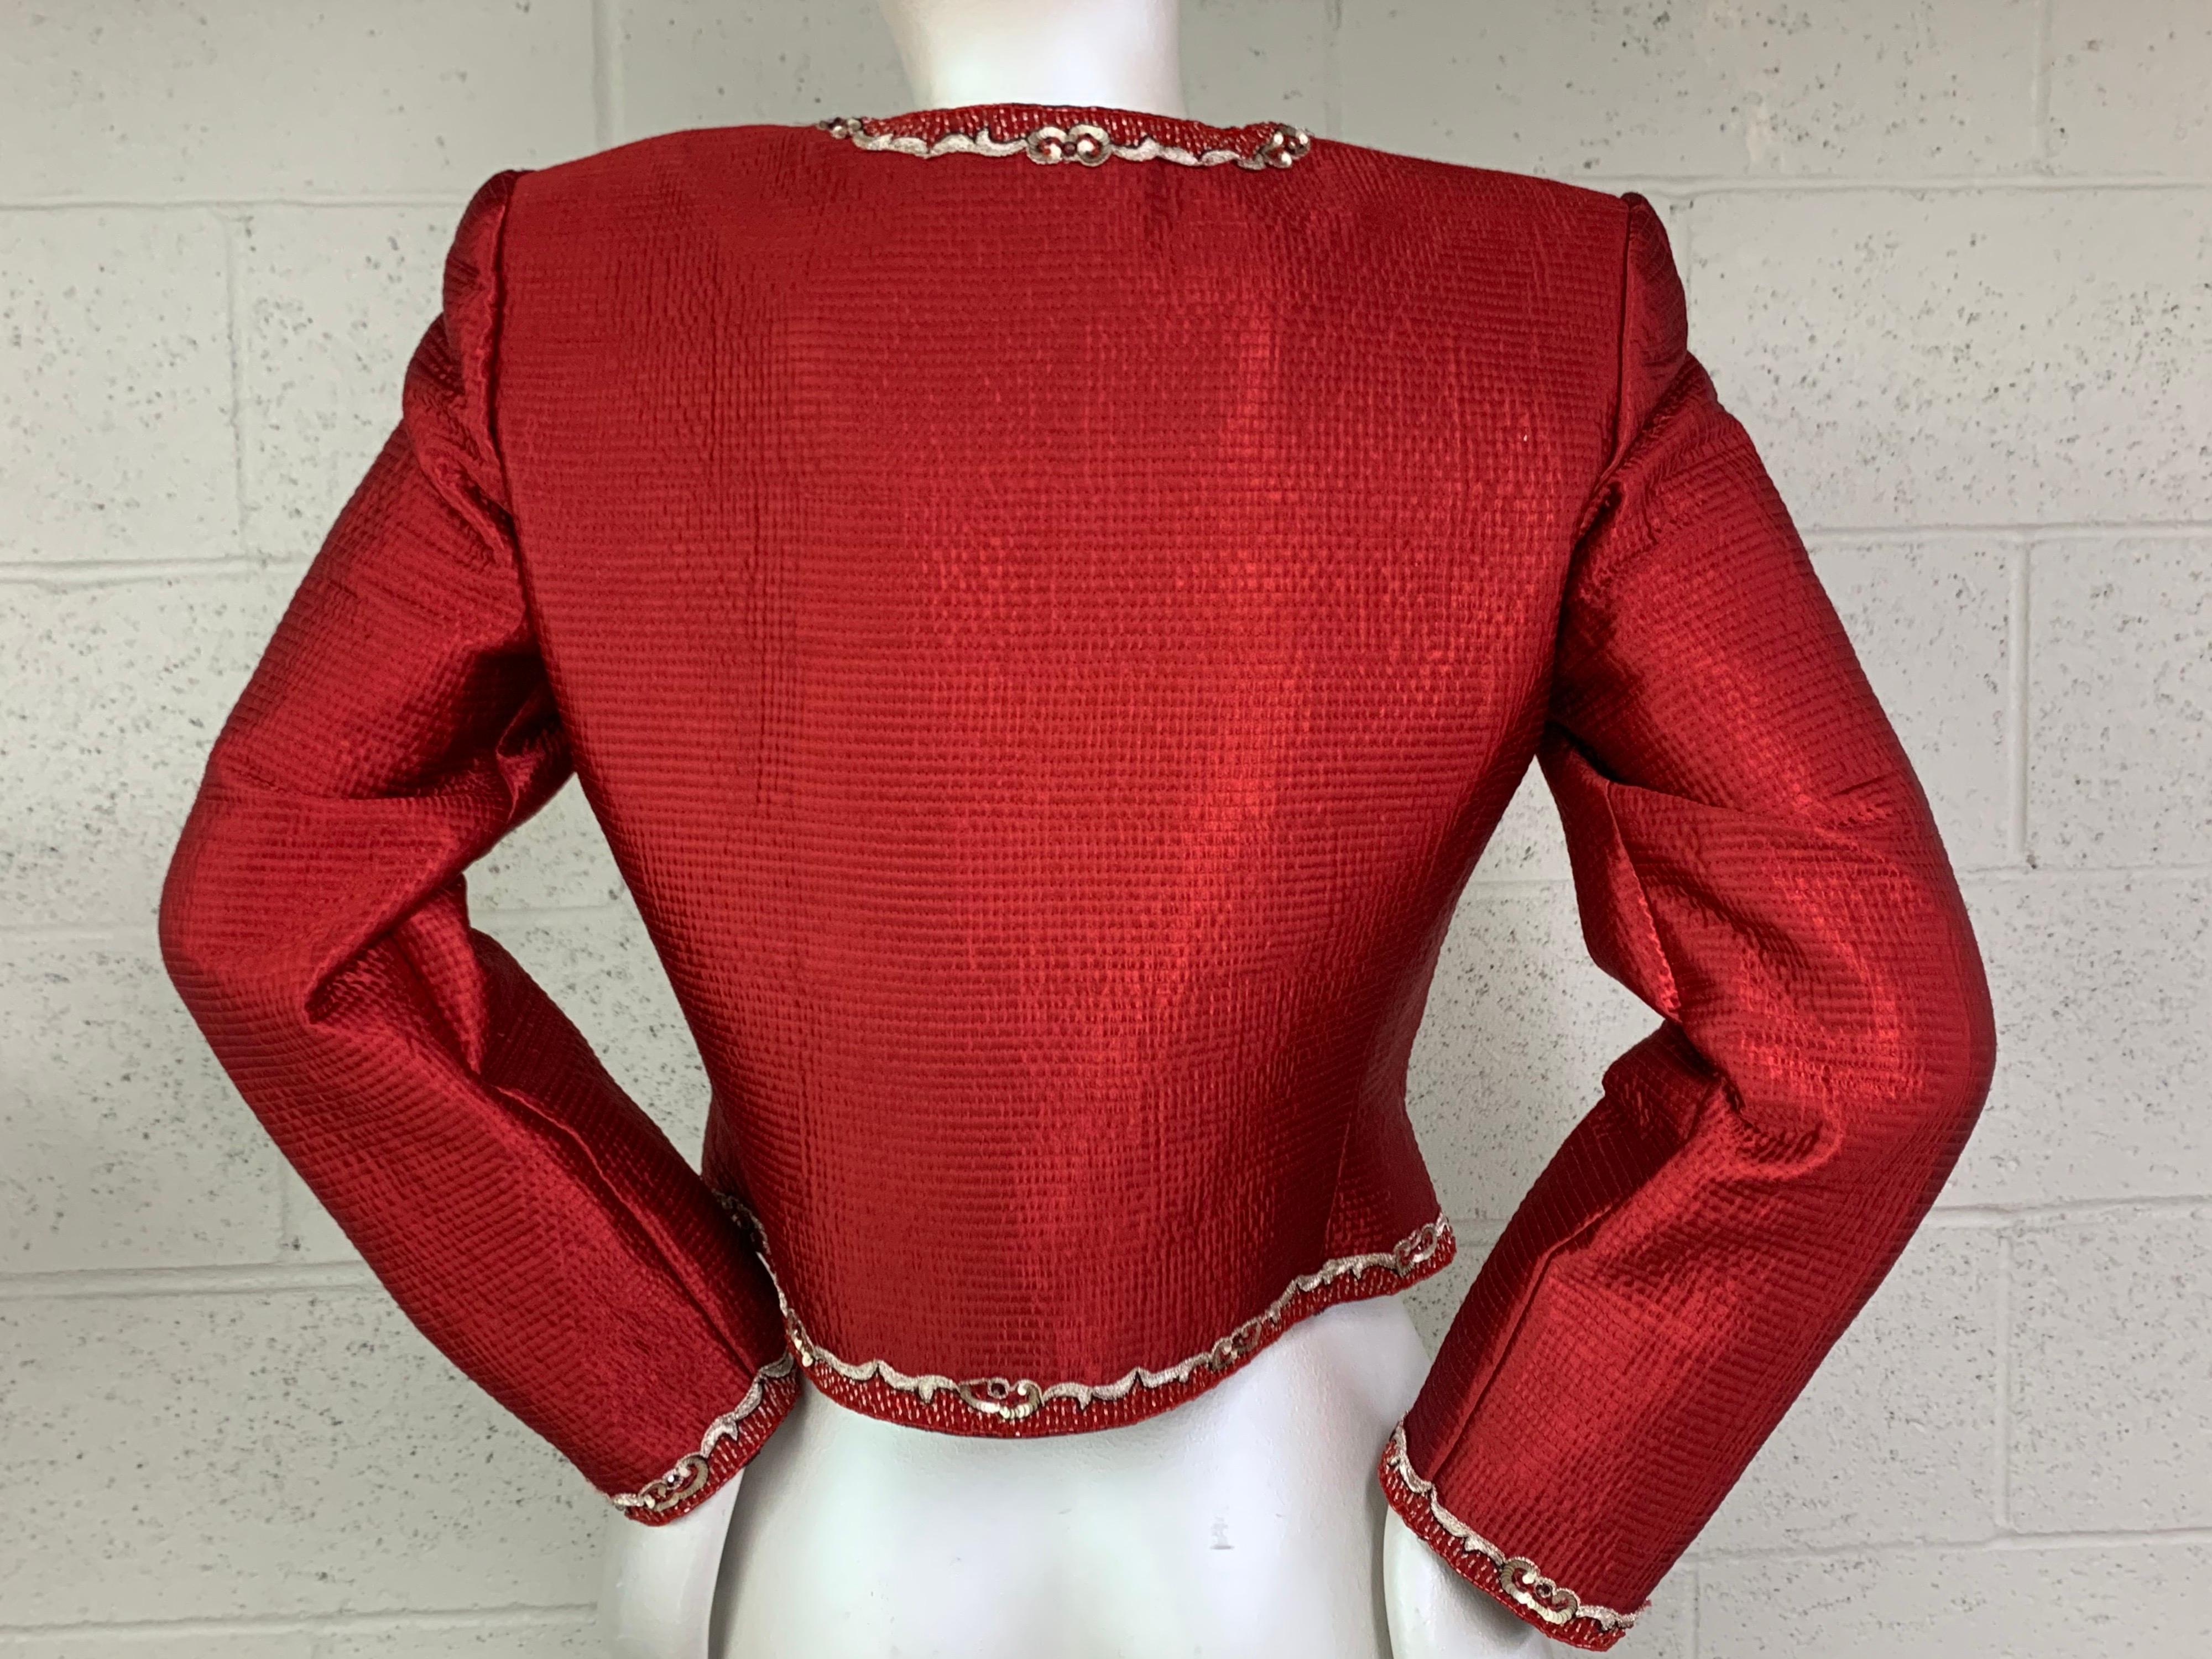 Women's 1980s Mary McFadden Red Textured Silk Zip-Front Jacket w/ Embroidery Trim